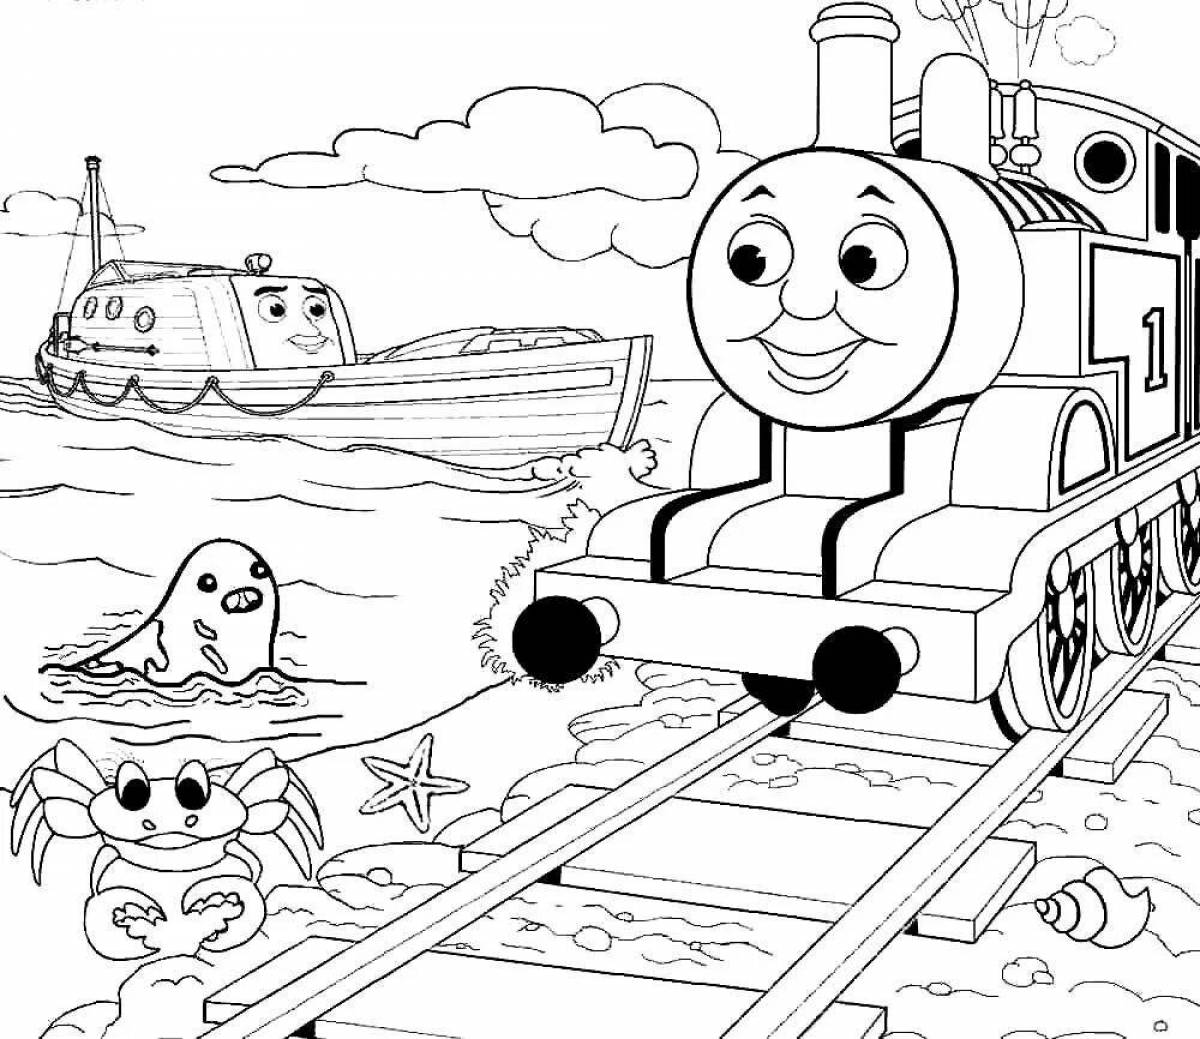 Color-explosion thomas exe coloring page